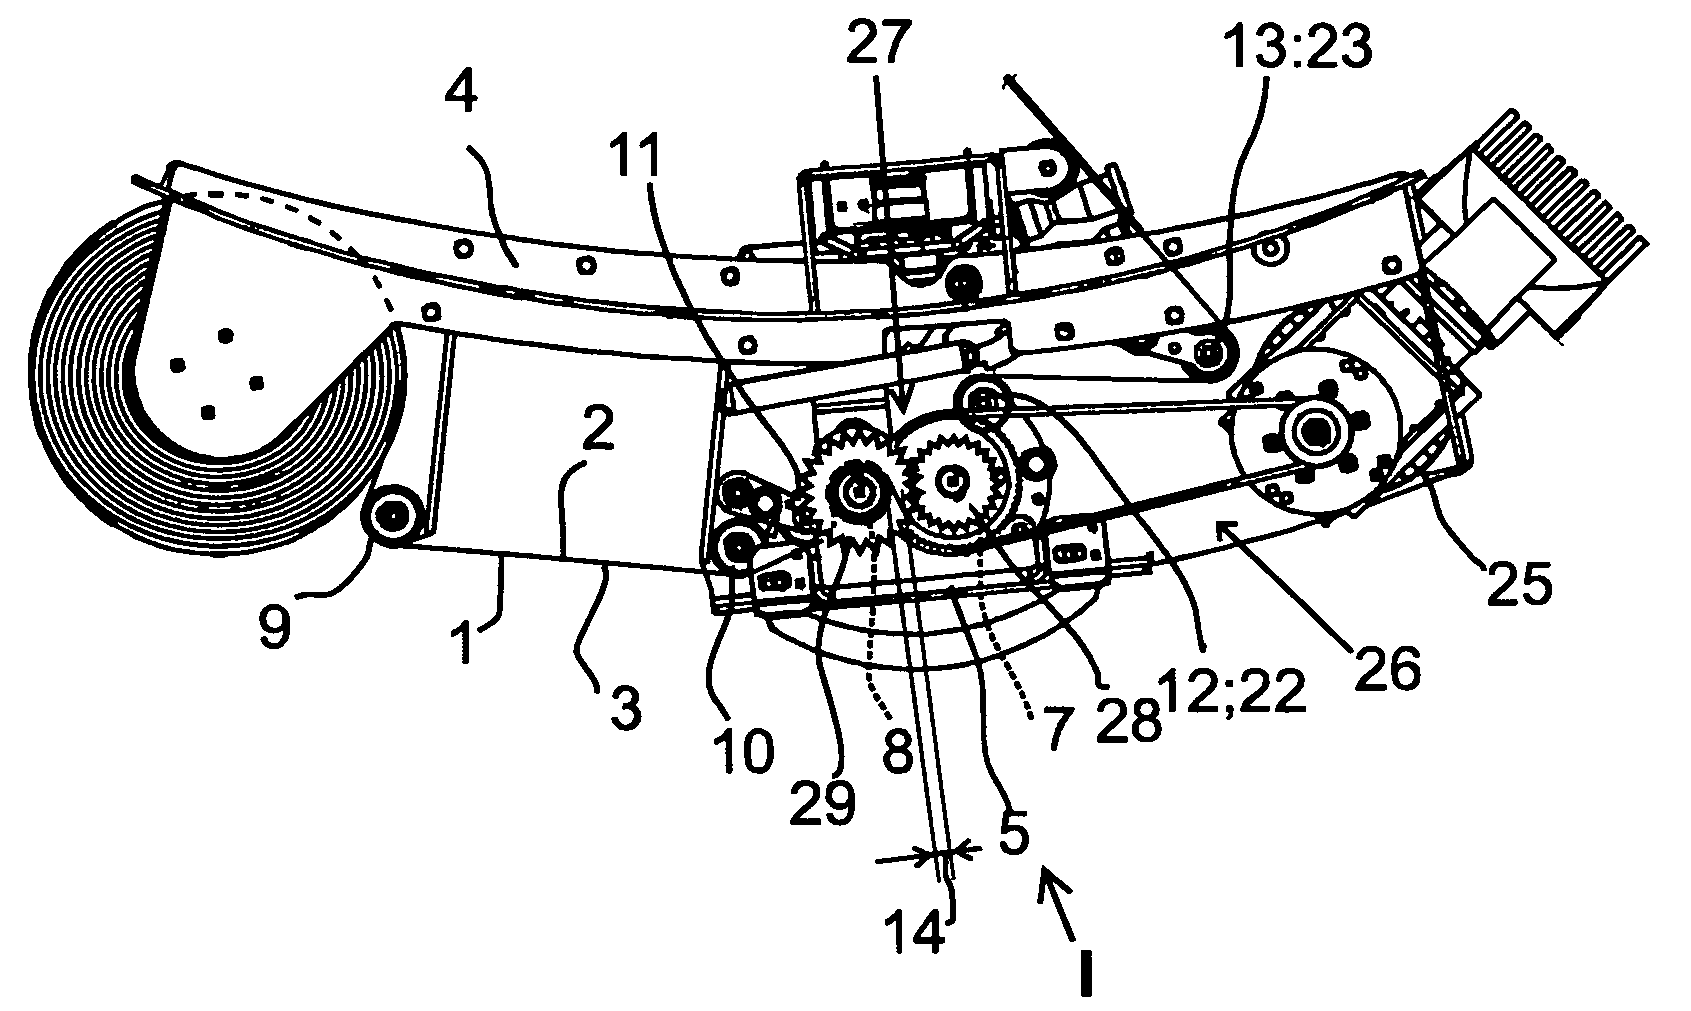 Film delivery device and use of same